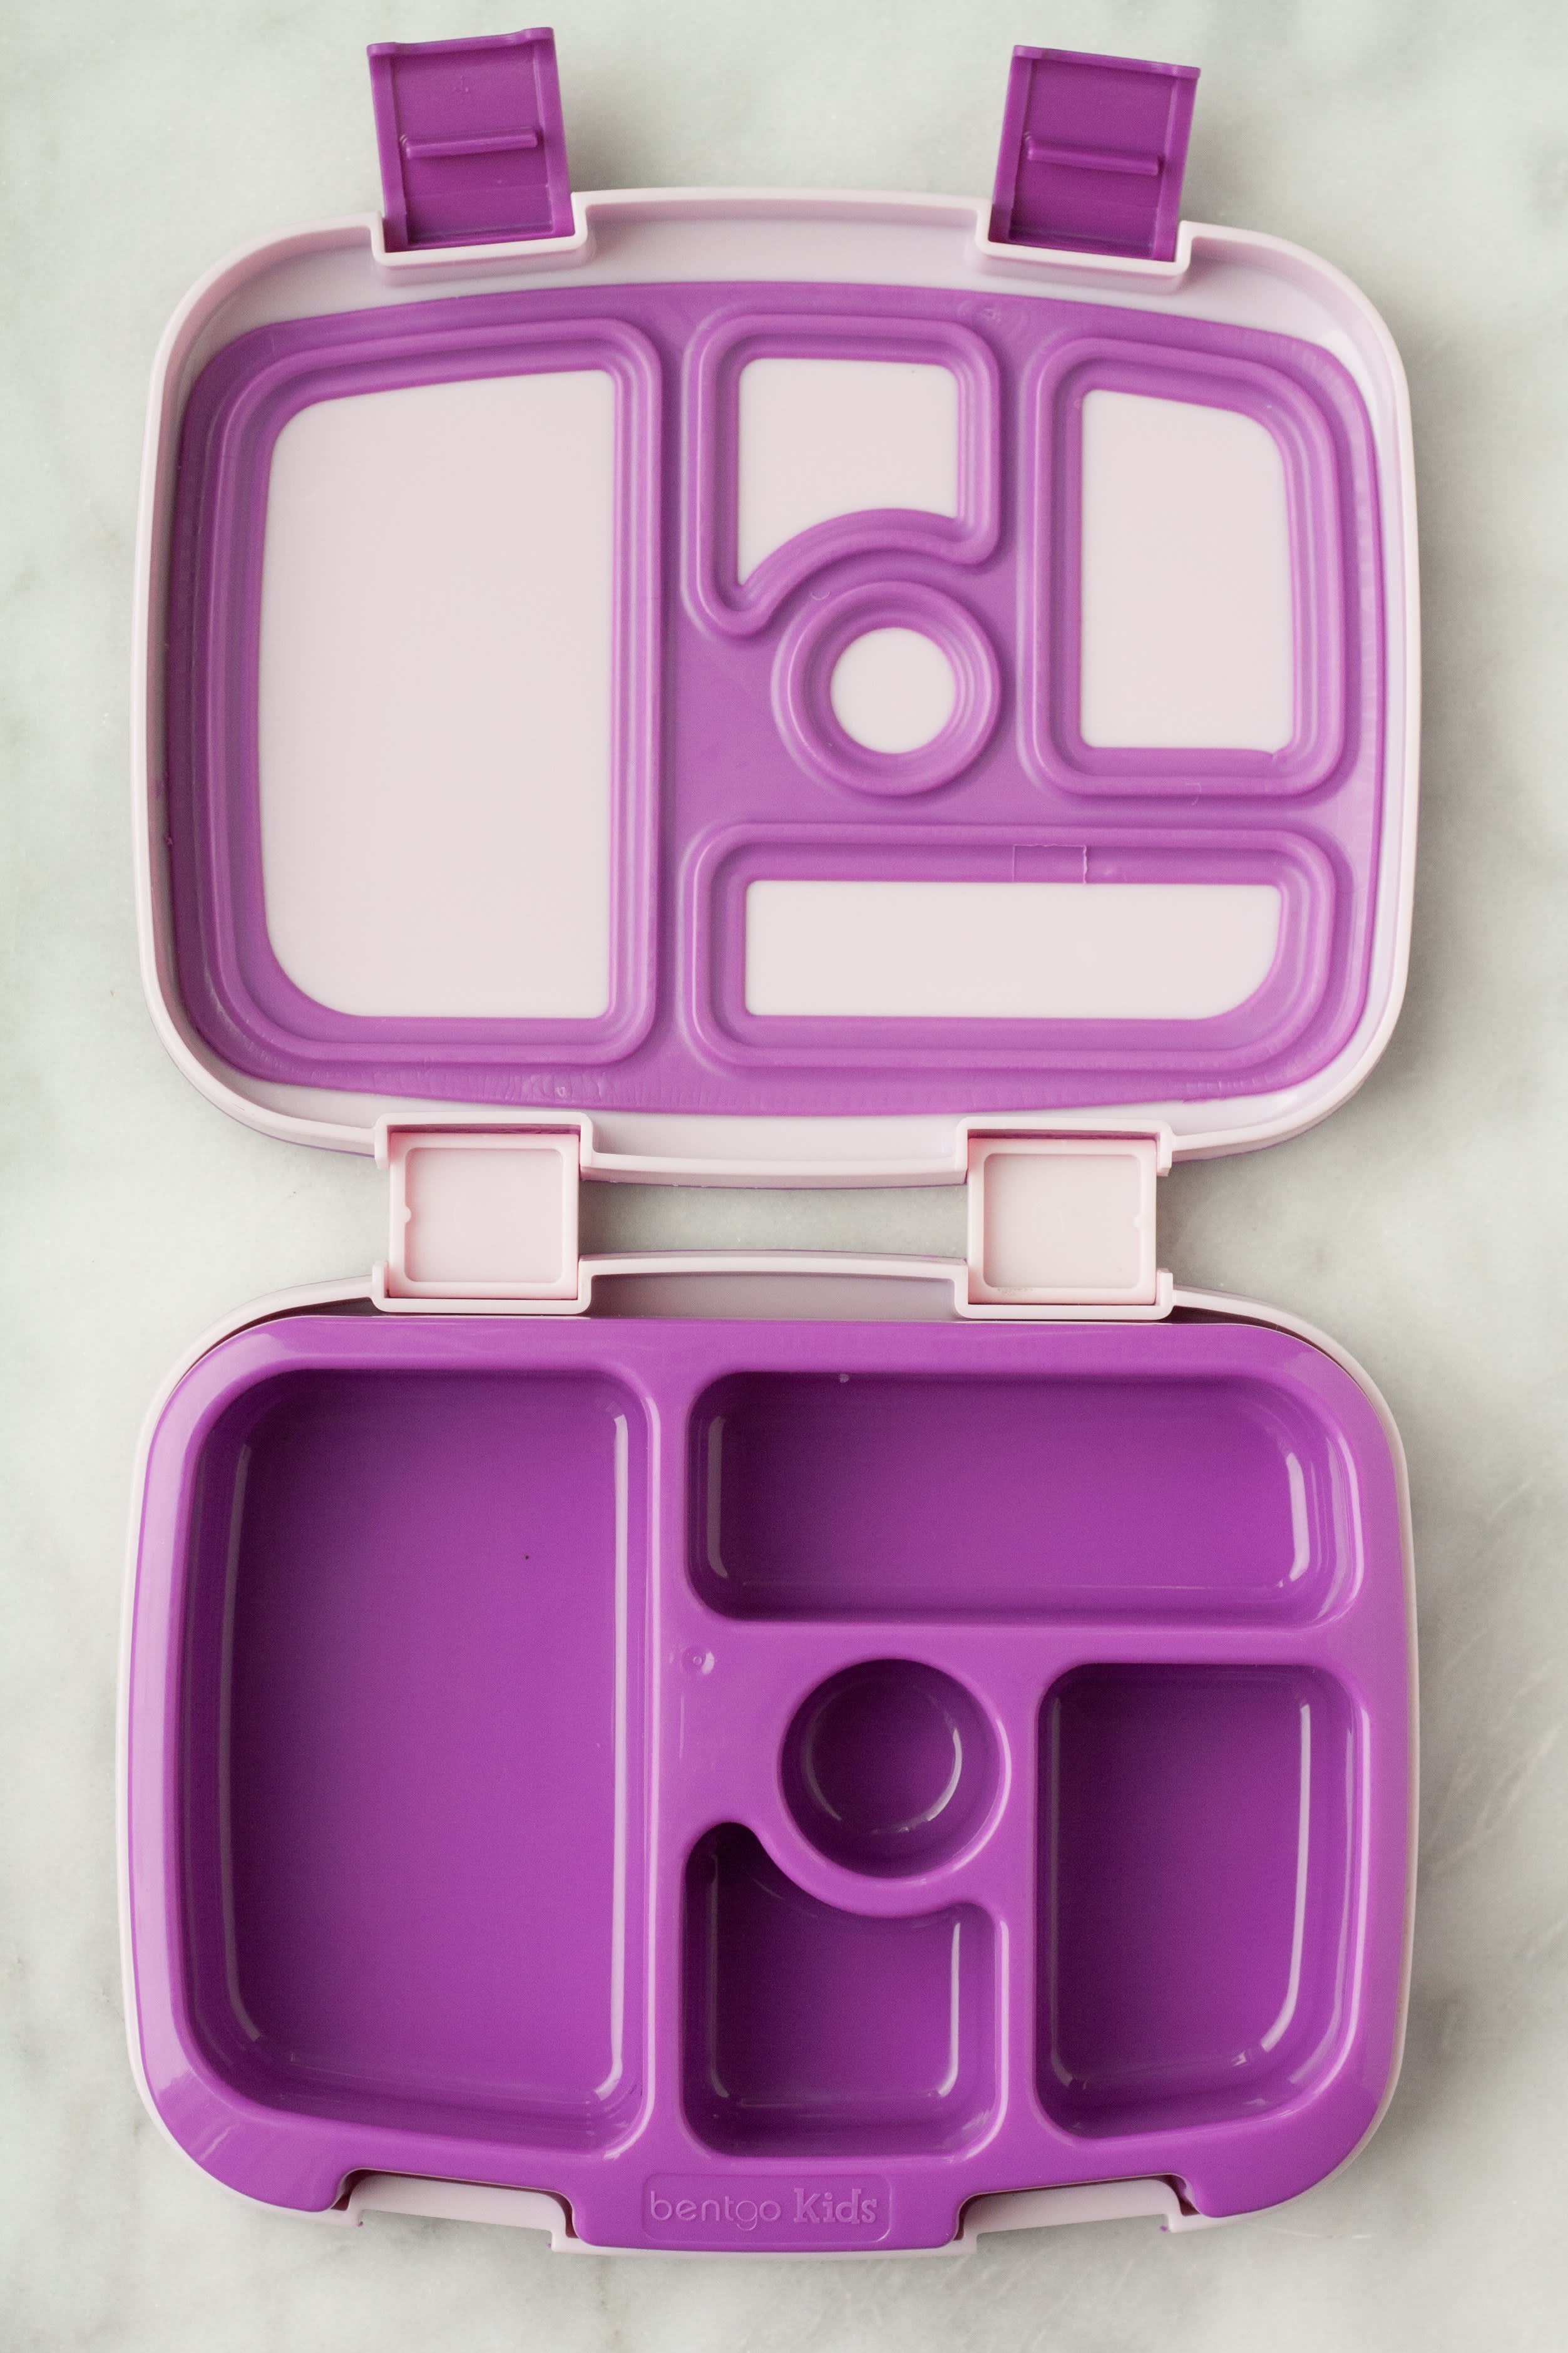 The Bentgo Kids Lunch Box Makes a Varied Lunch Easy (& Leakproof) | Kitchn